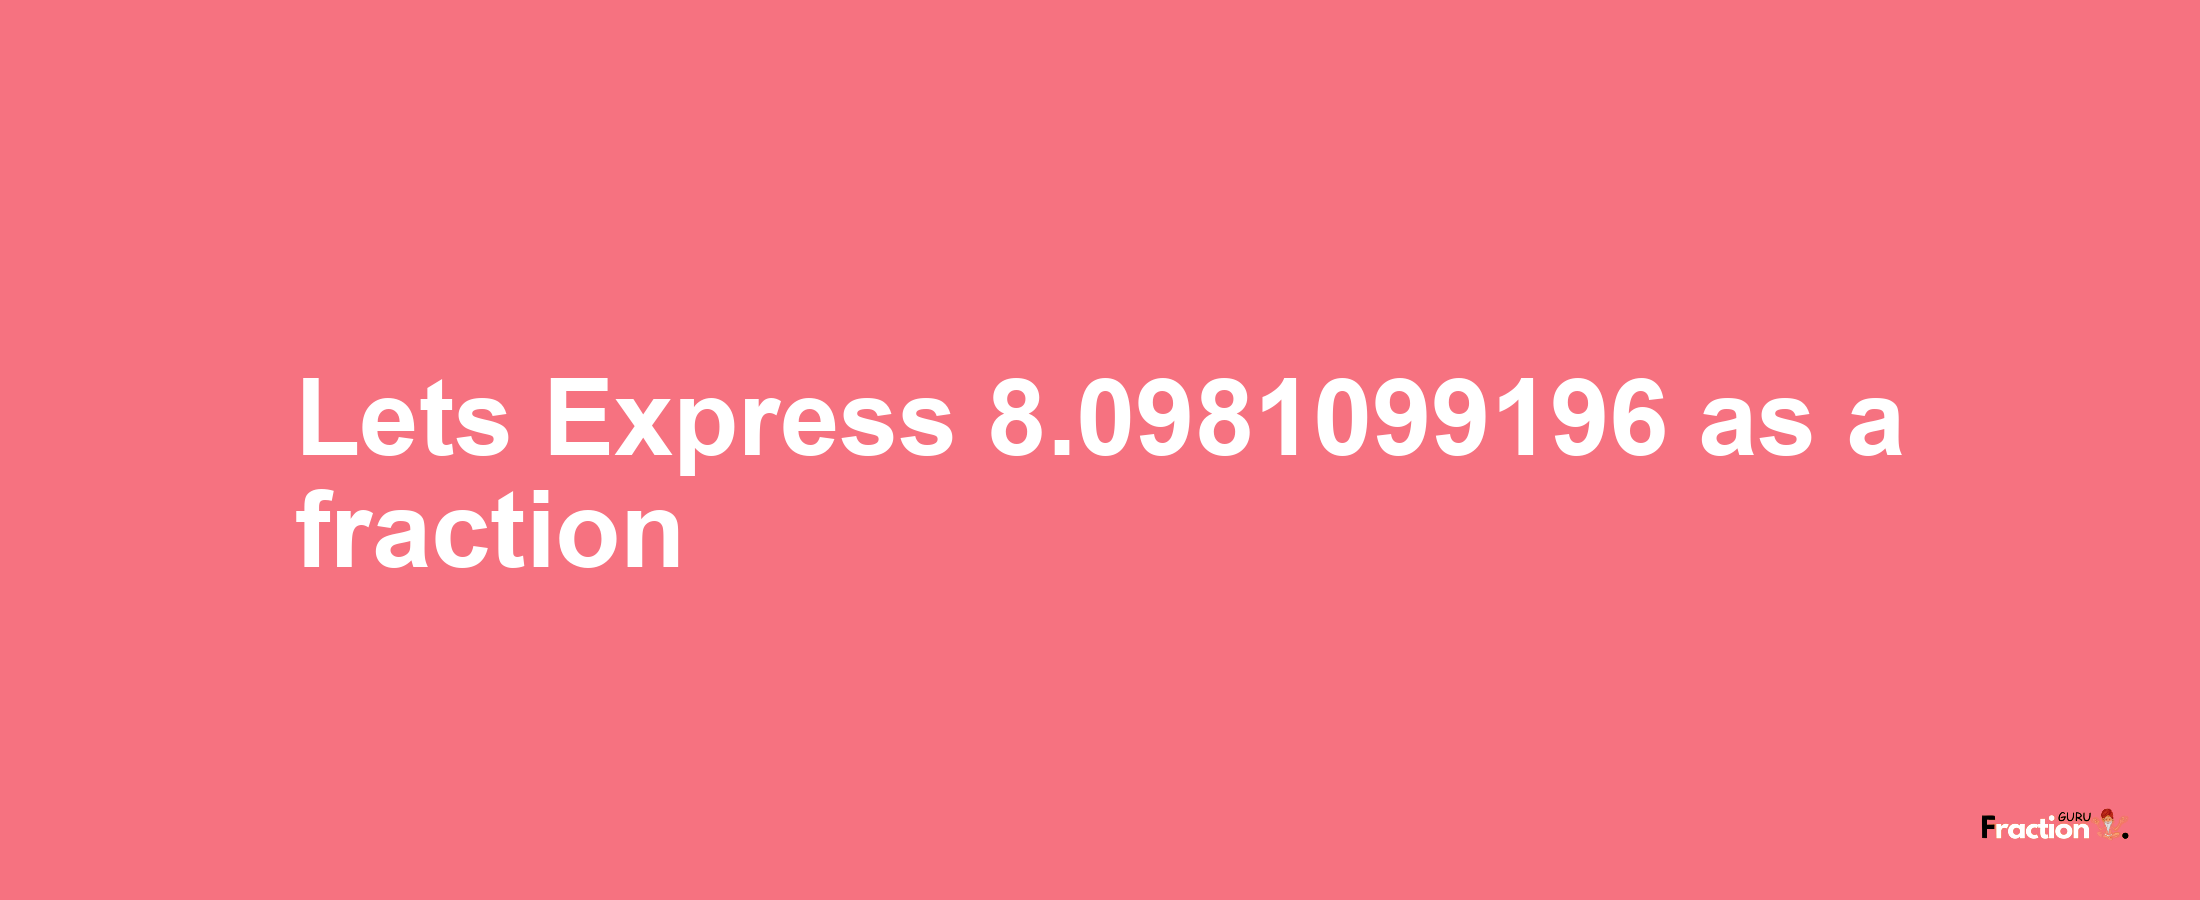 Lets Express 8.0981099196 as afraction